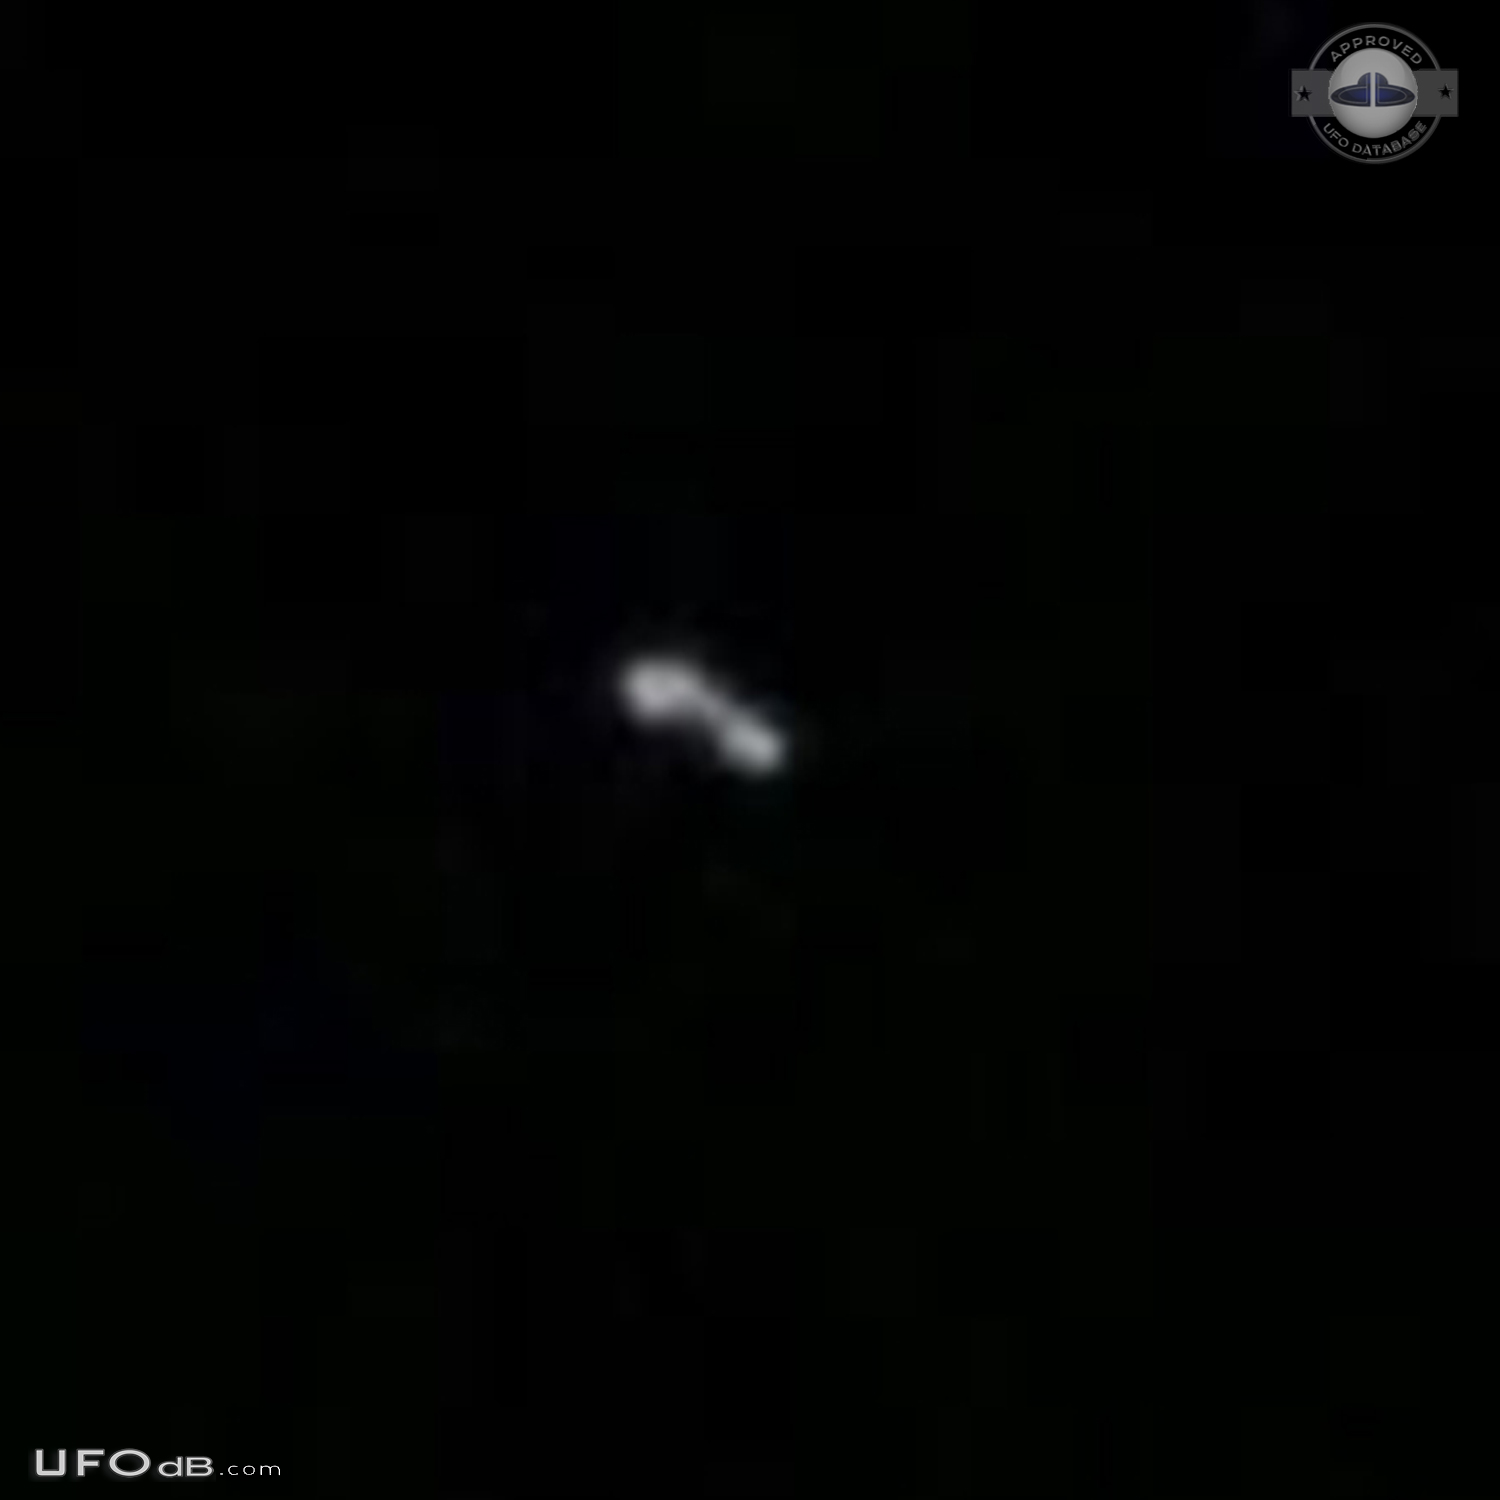 Orb like object split into three objects, was bright like a star UFO Picture #671-3